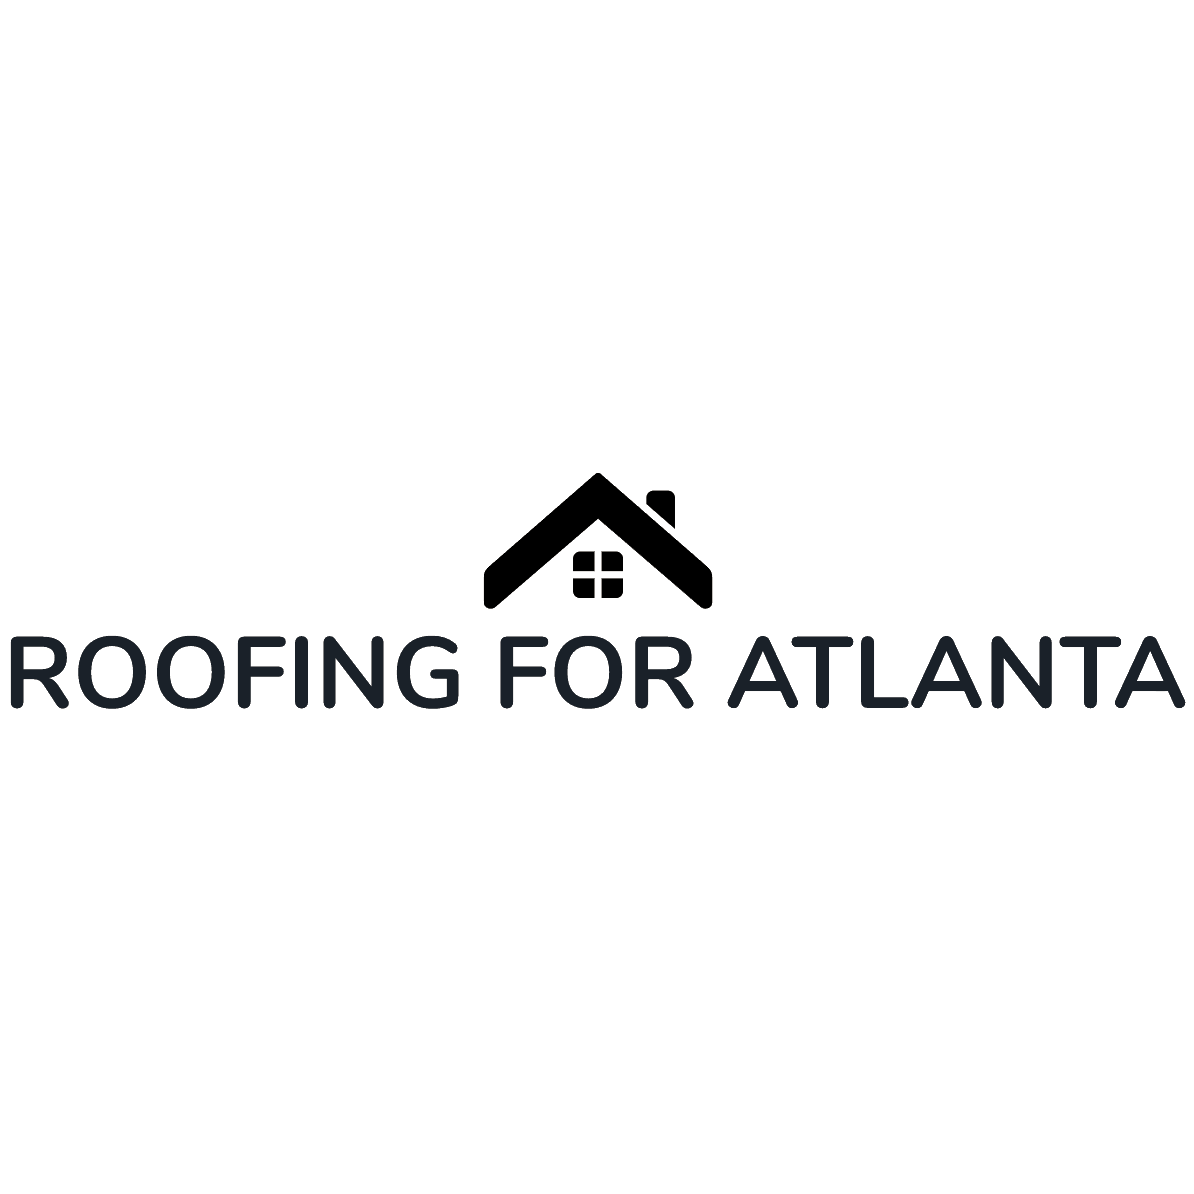 Roofing for Atlanta